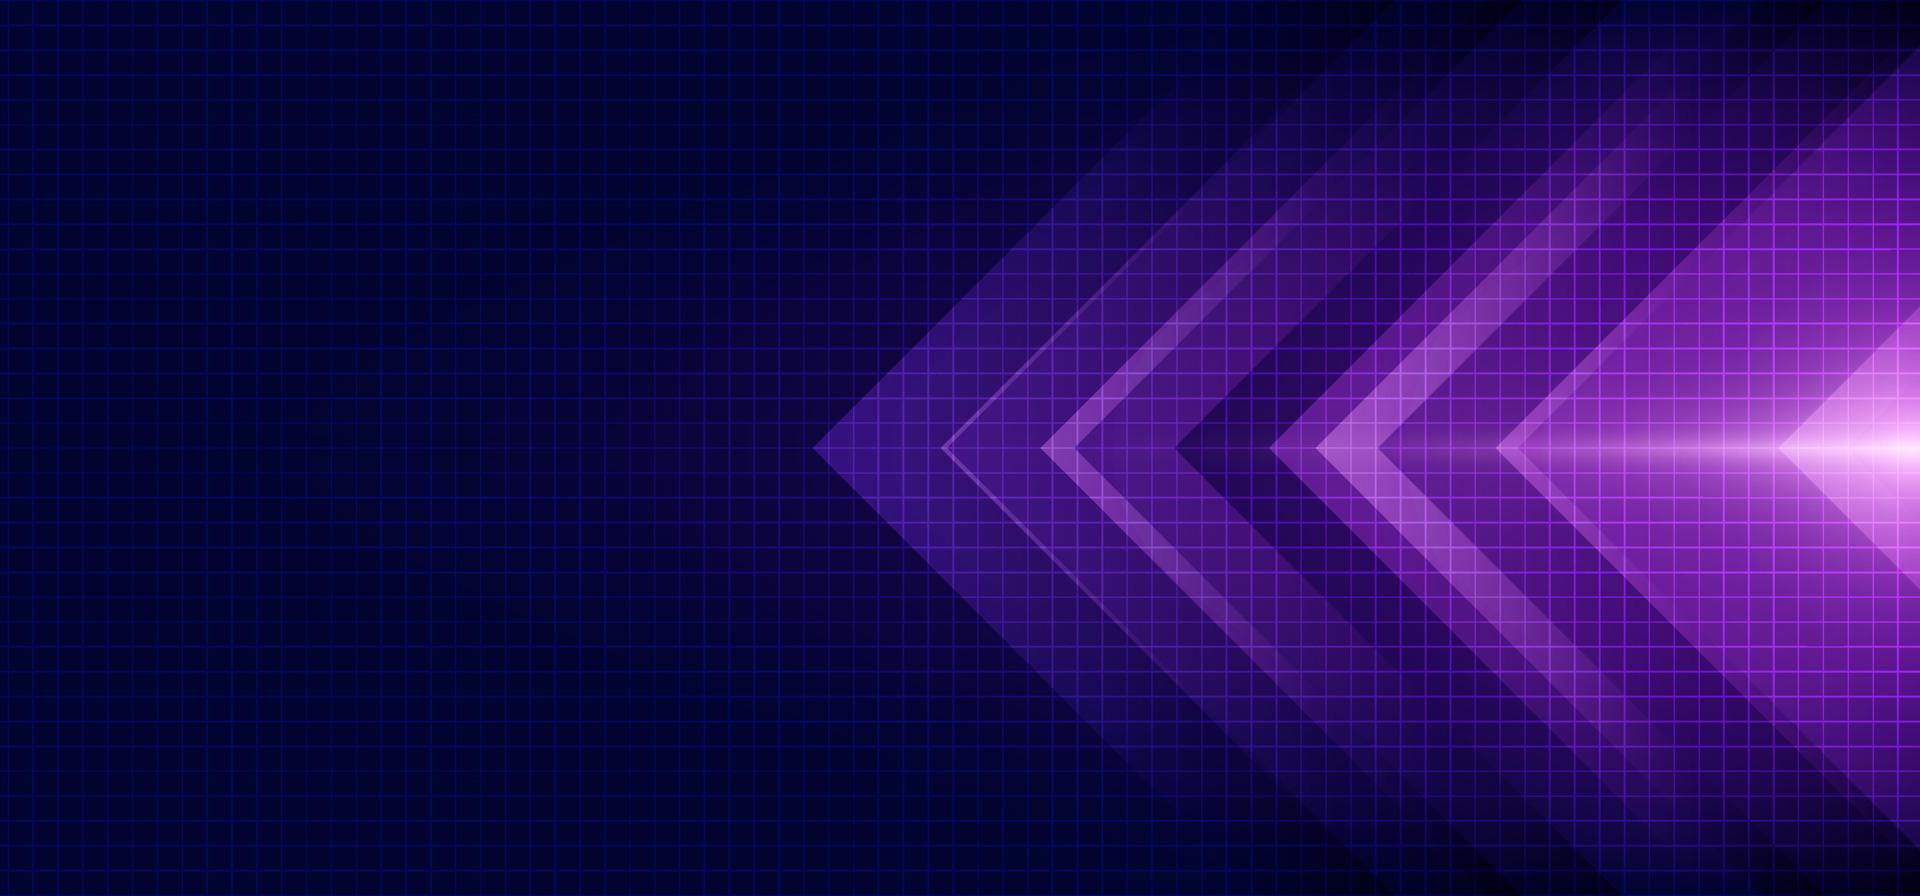 Abstract blue and purple arrow glowing with lighting and line grid on blue background vector